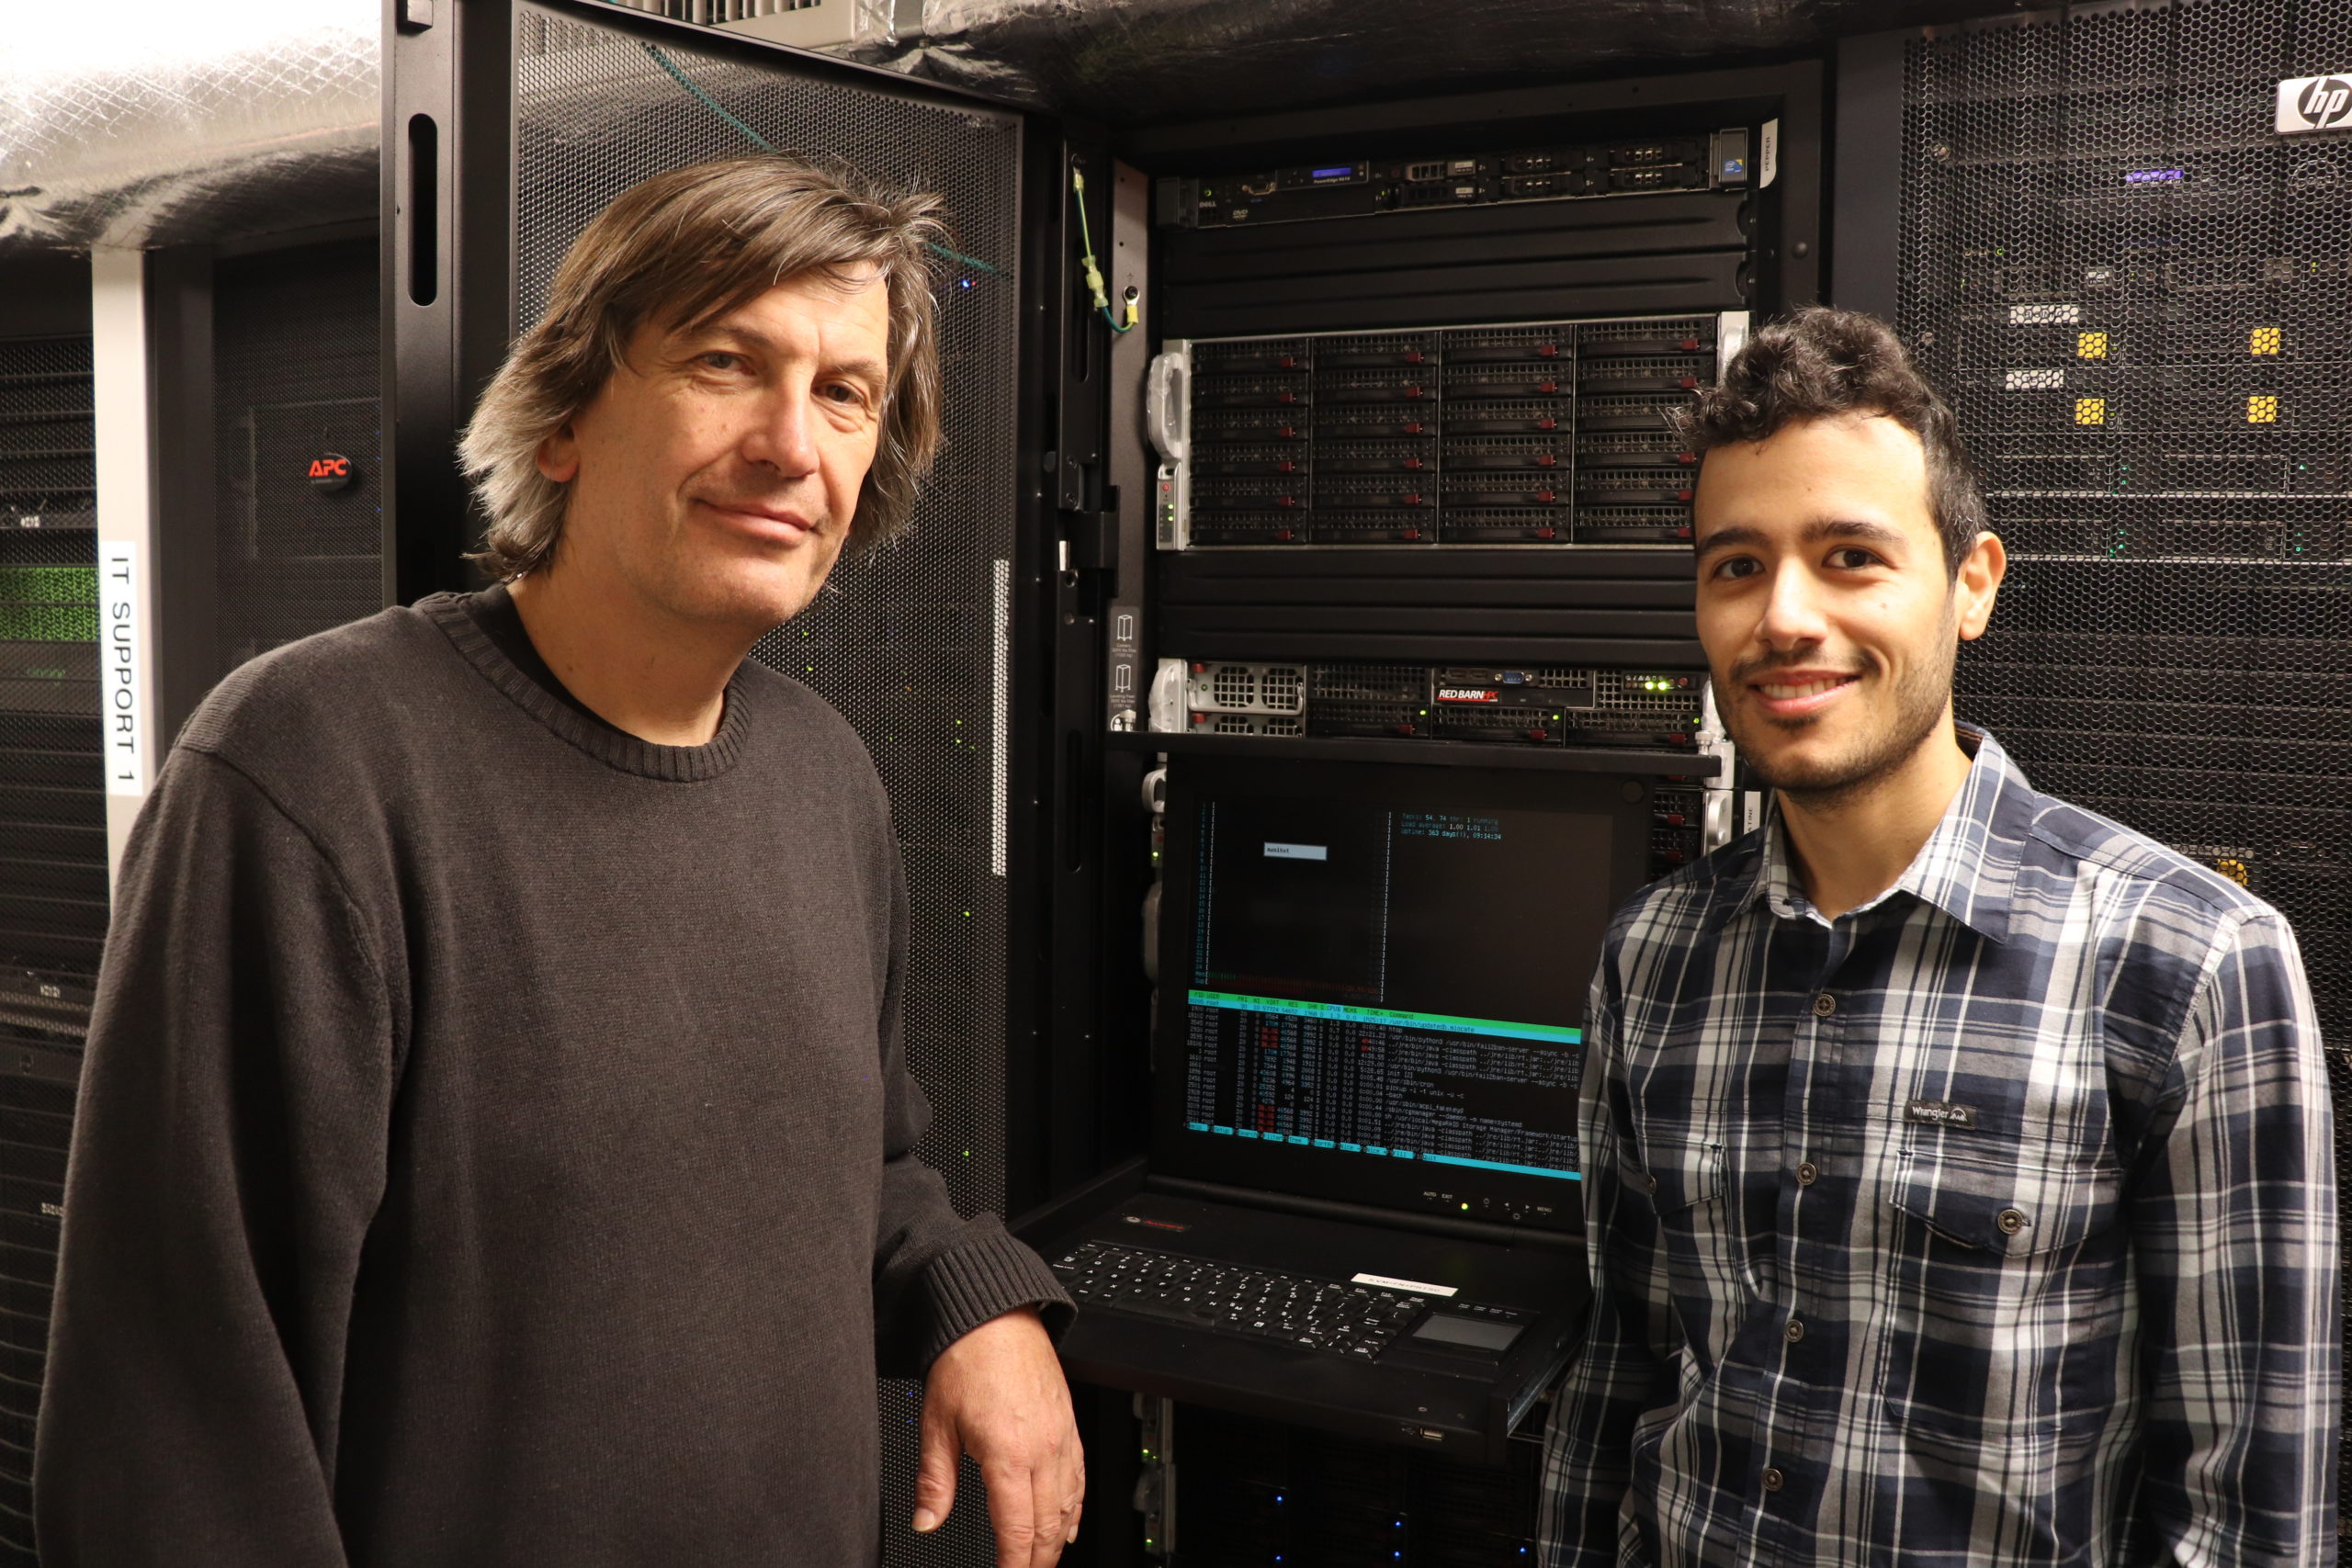 Lukas Mueller and Nicolas Morales pose on either side of a server.